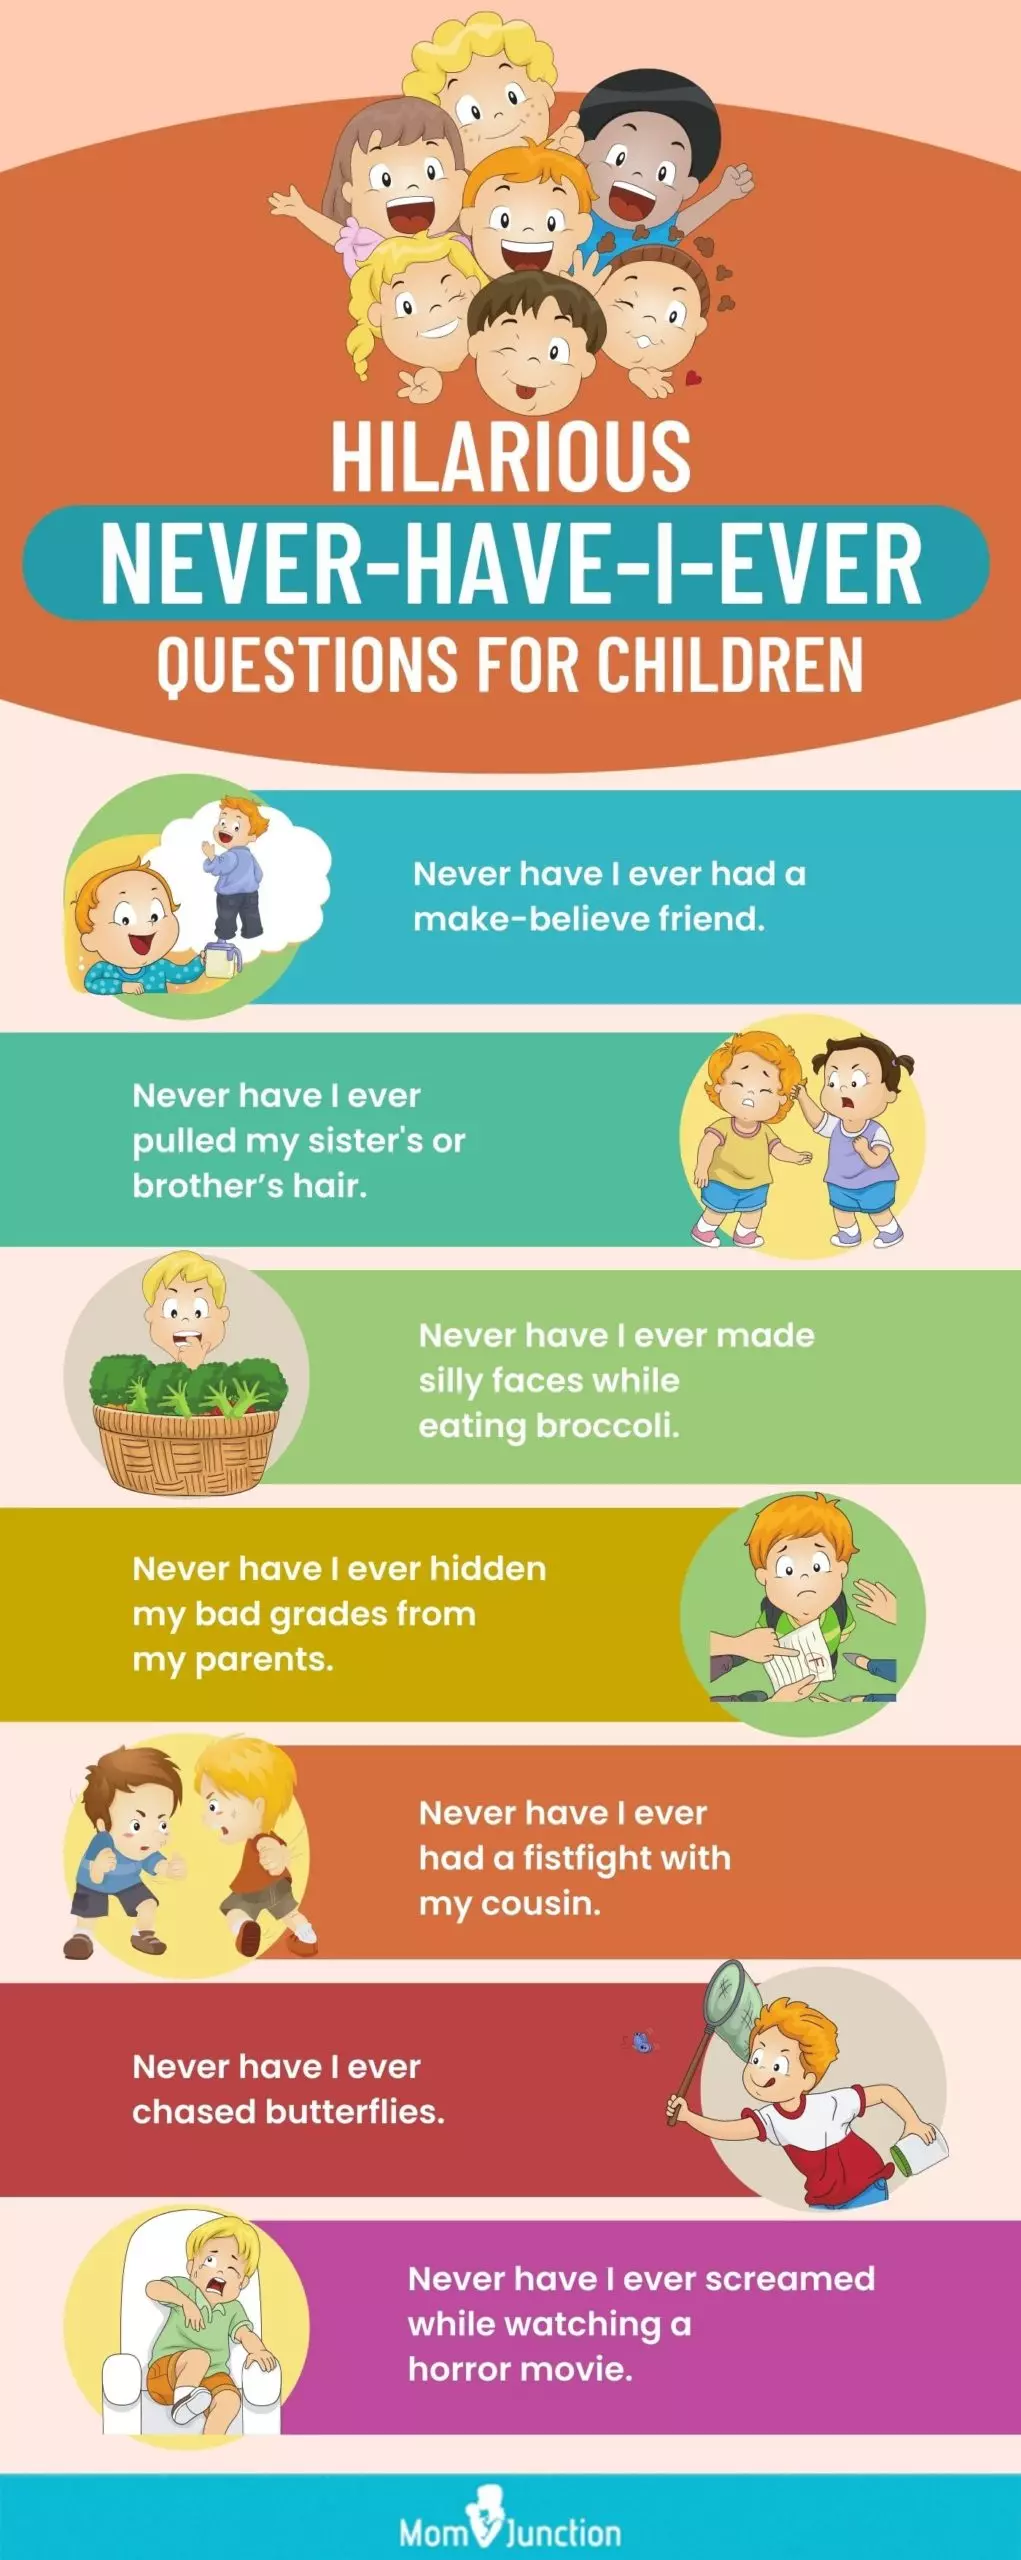 hilarious never have i ever questions for children (infographic)